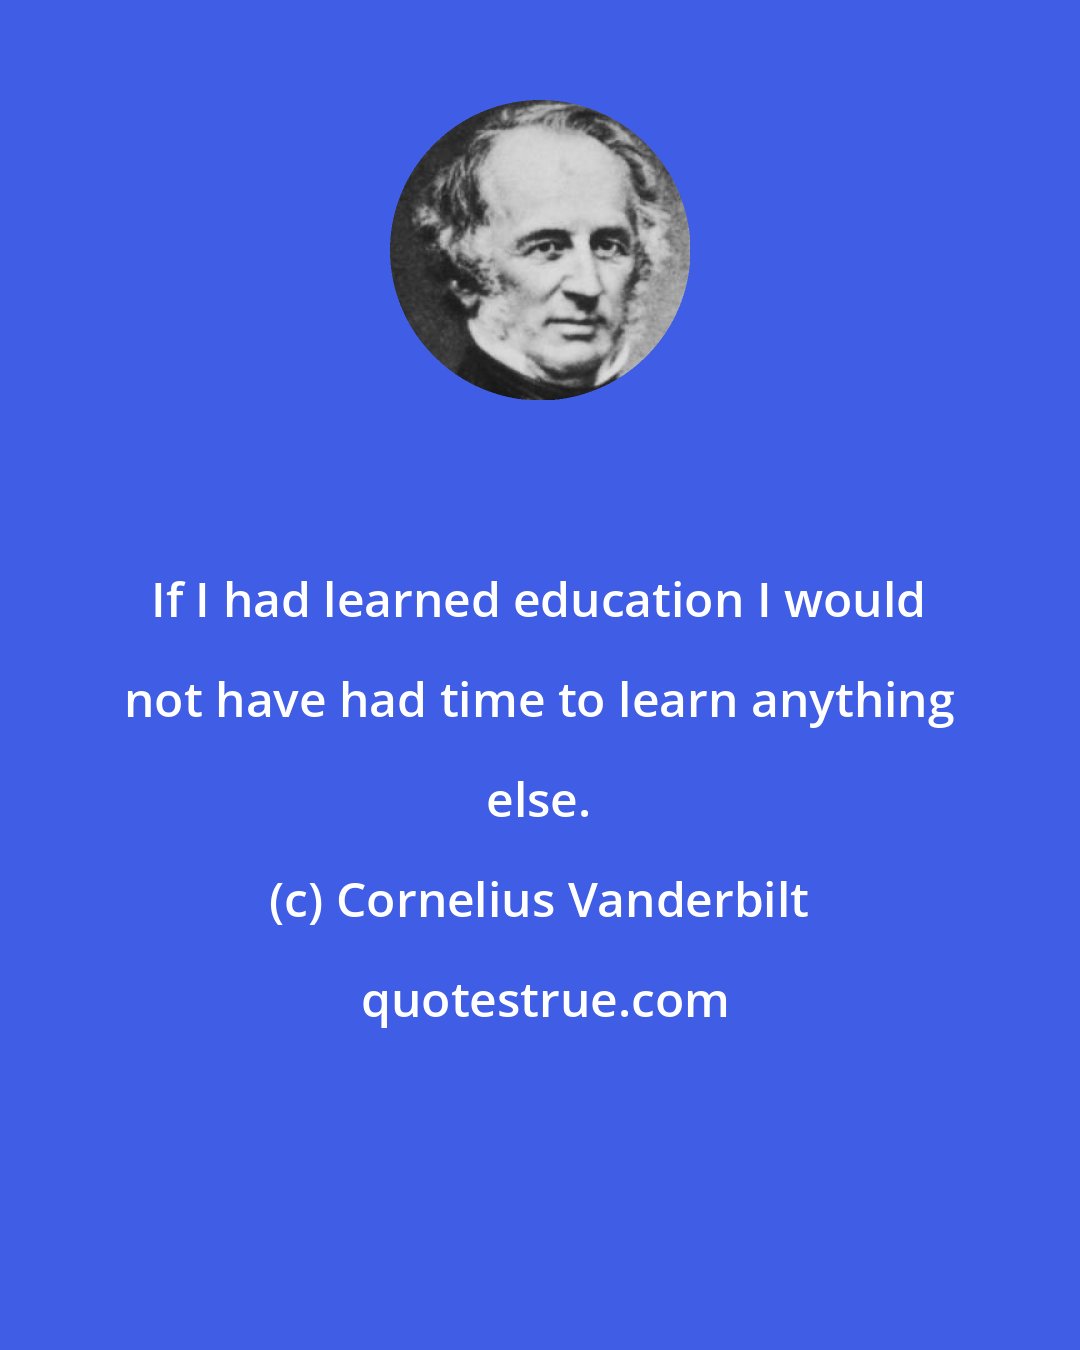 Cornelius Vanderbilt: If I had learned education I would not have had time to learn anything else.